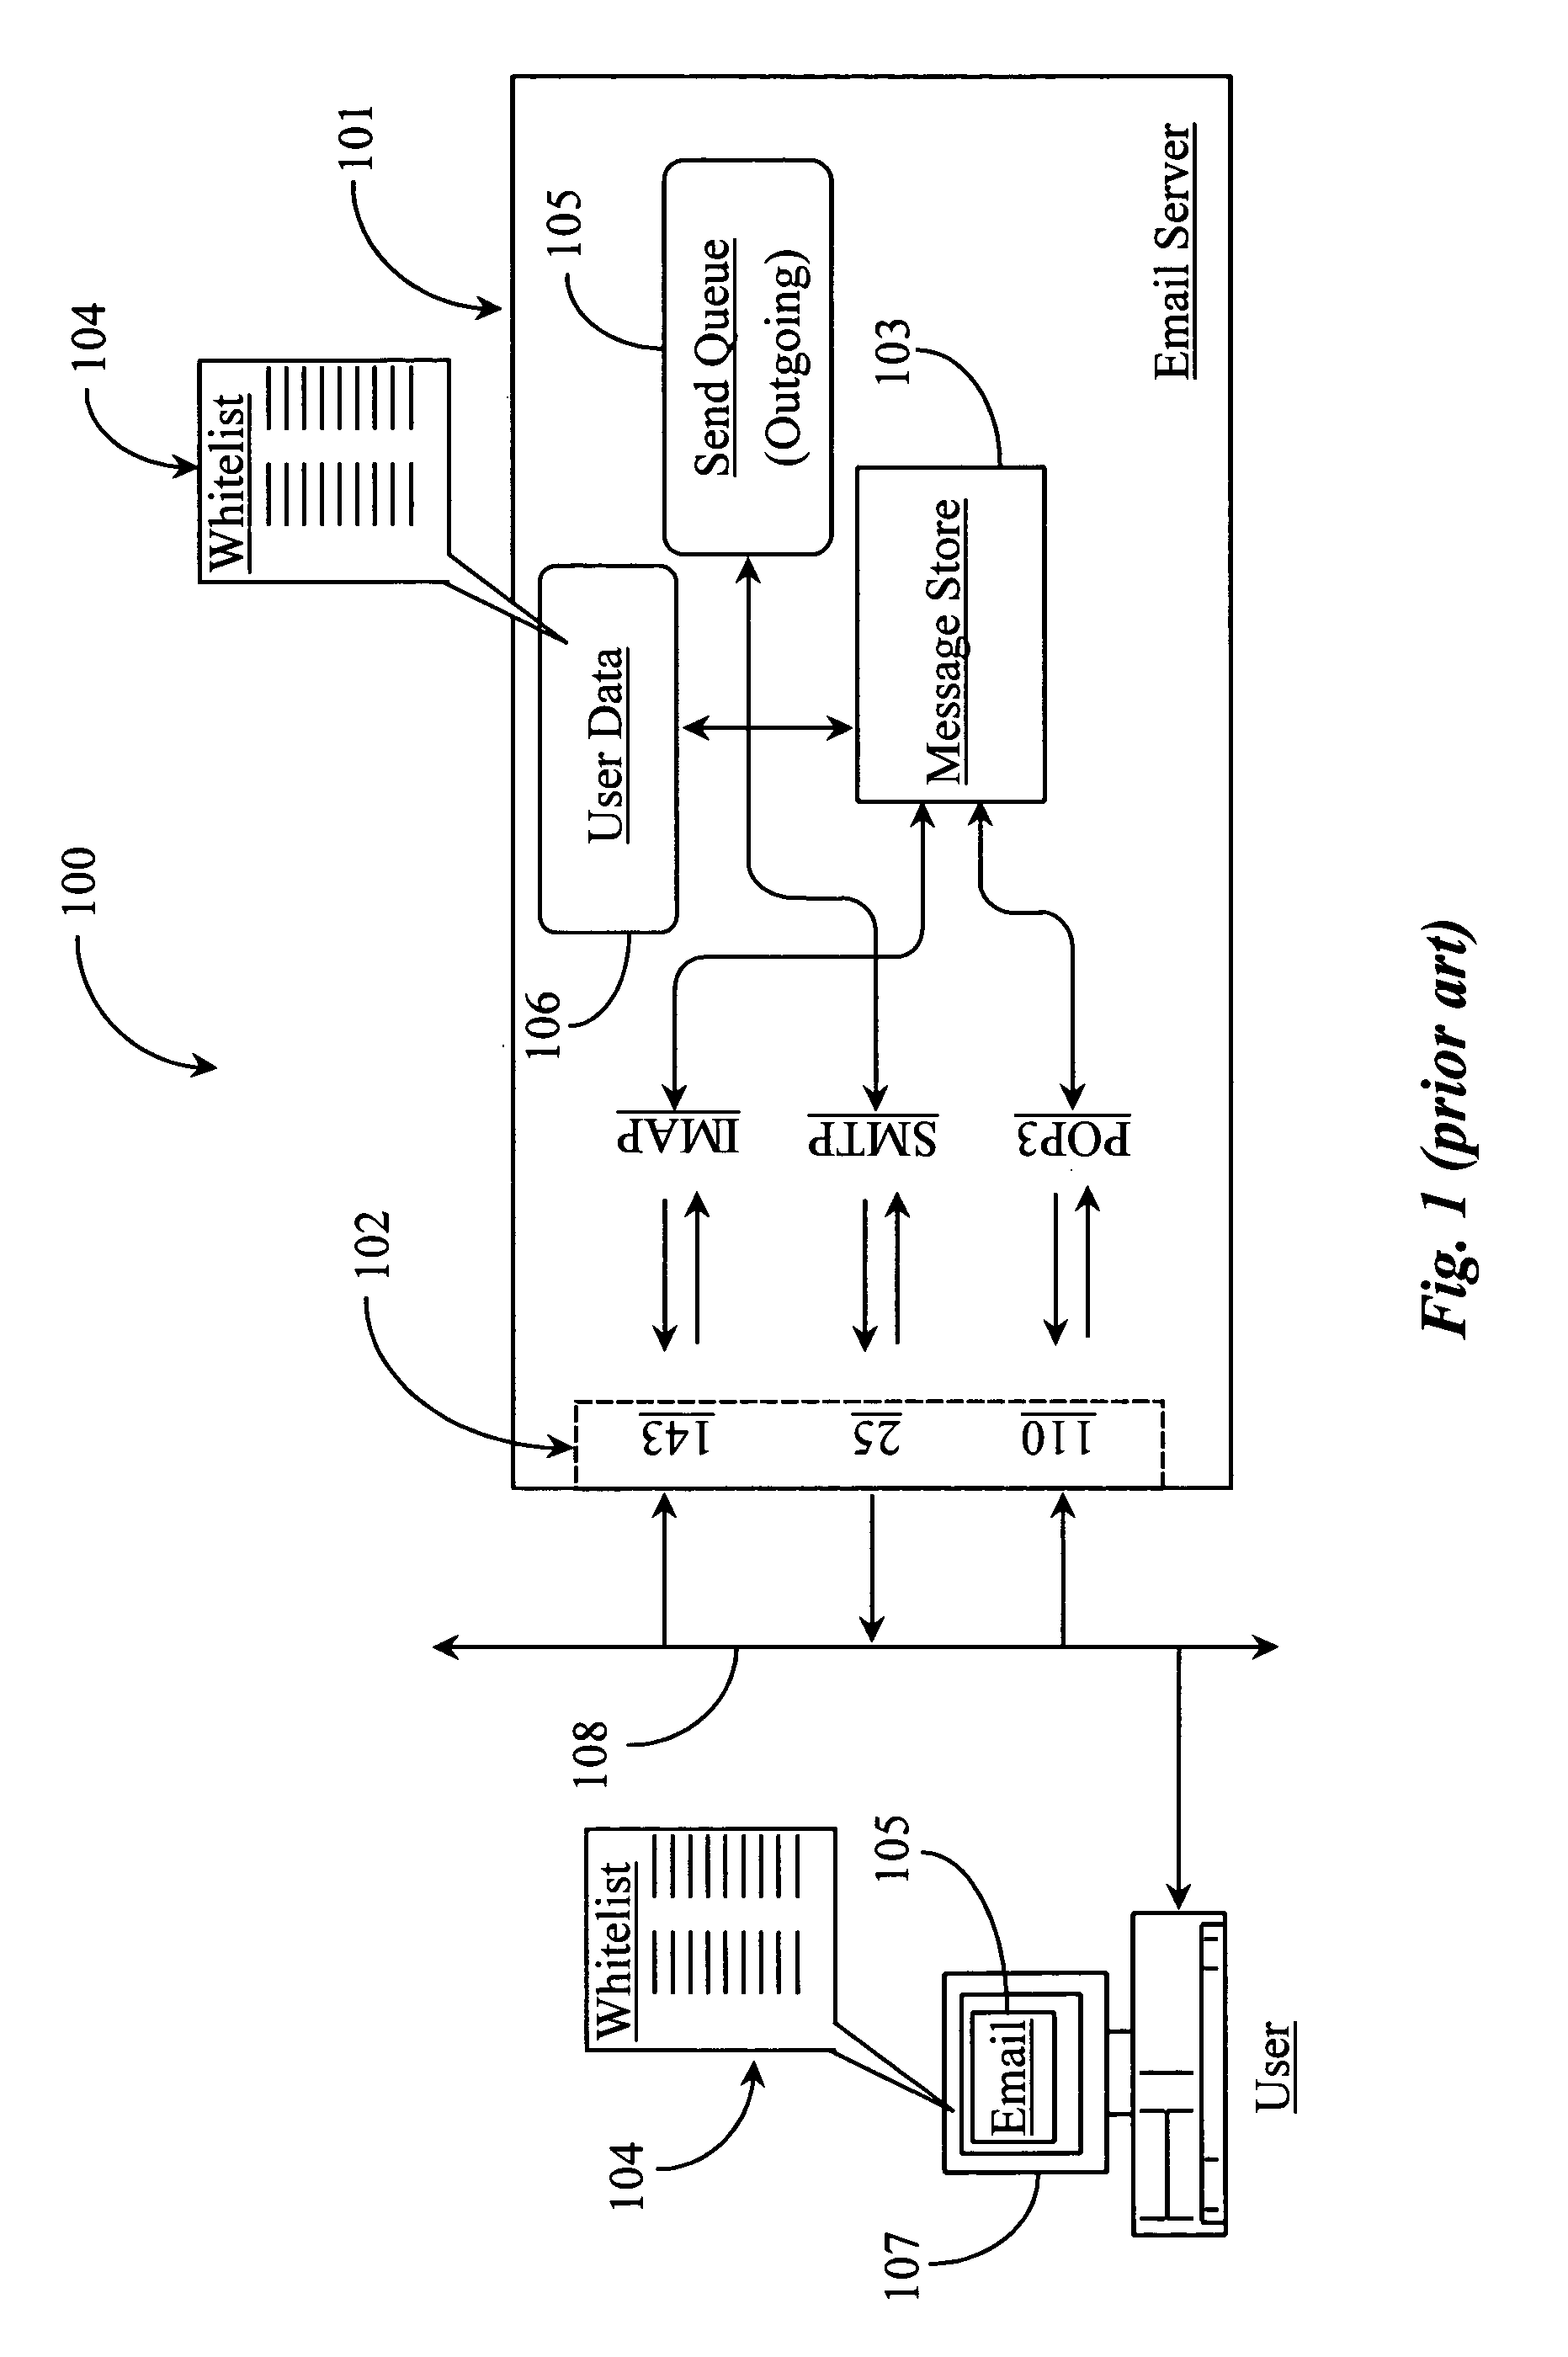 System for reclassification of electronic messages in a spam filtering system